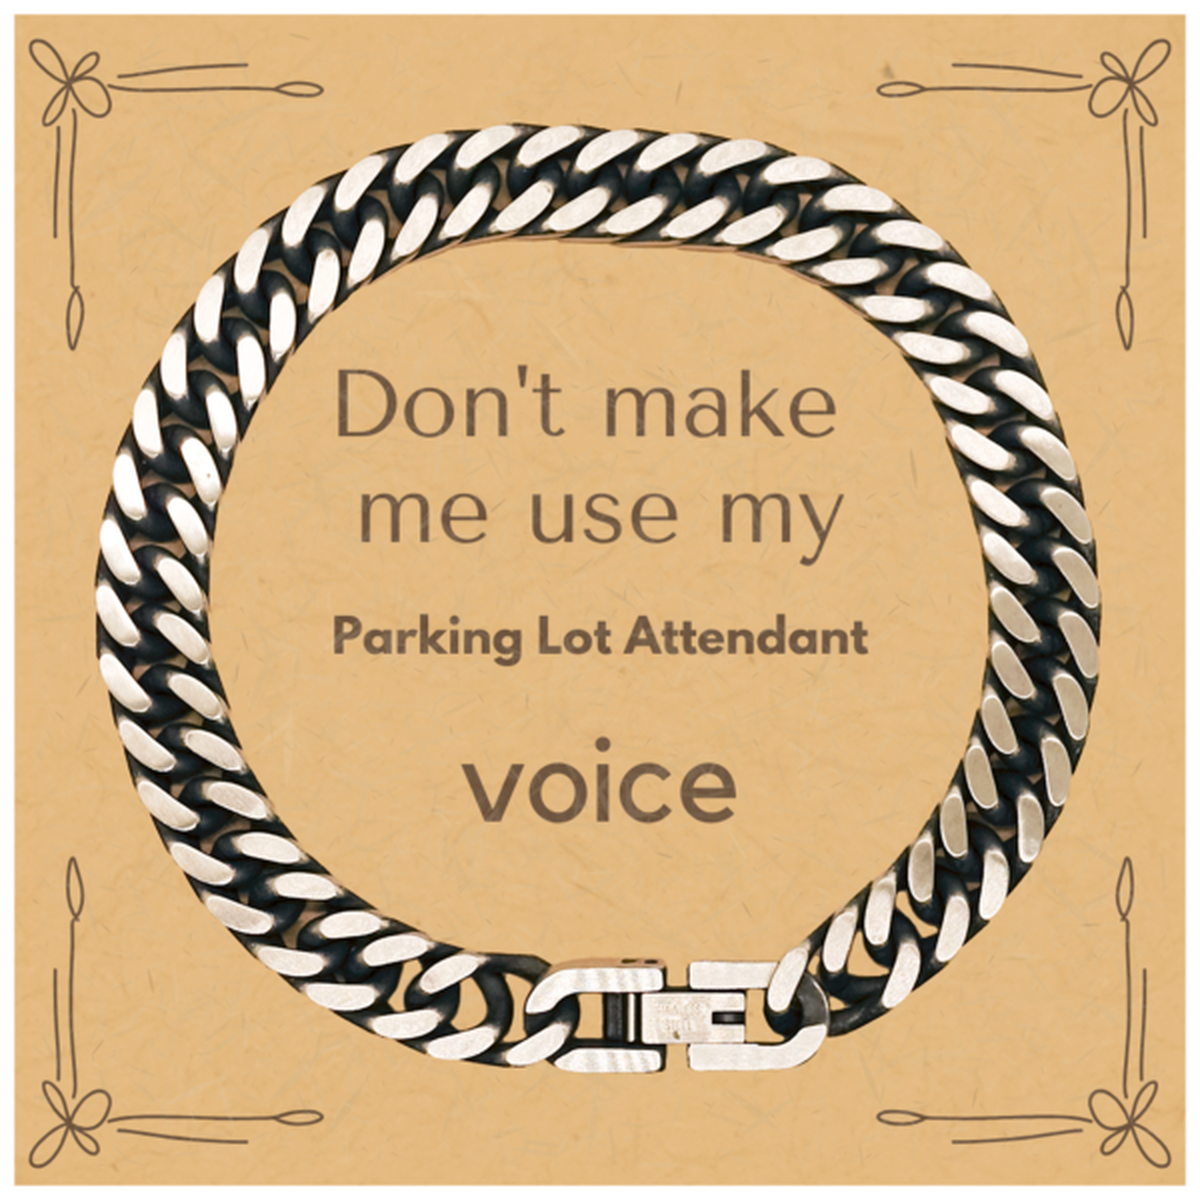 Don't make me use my Parking Lot Attendant voice, Sarcasm Parking Lot Attendant Card Gifts, Christmas Parking Lot Attendant Cuban Link Chain Bracelet Birthday Unique Gifts For Parking Lot Attendant Coworkers, Men, Women, Colleague, Friends